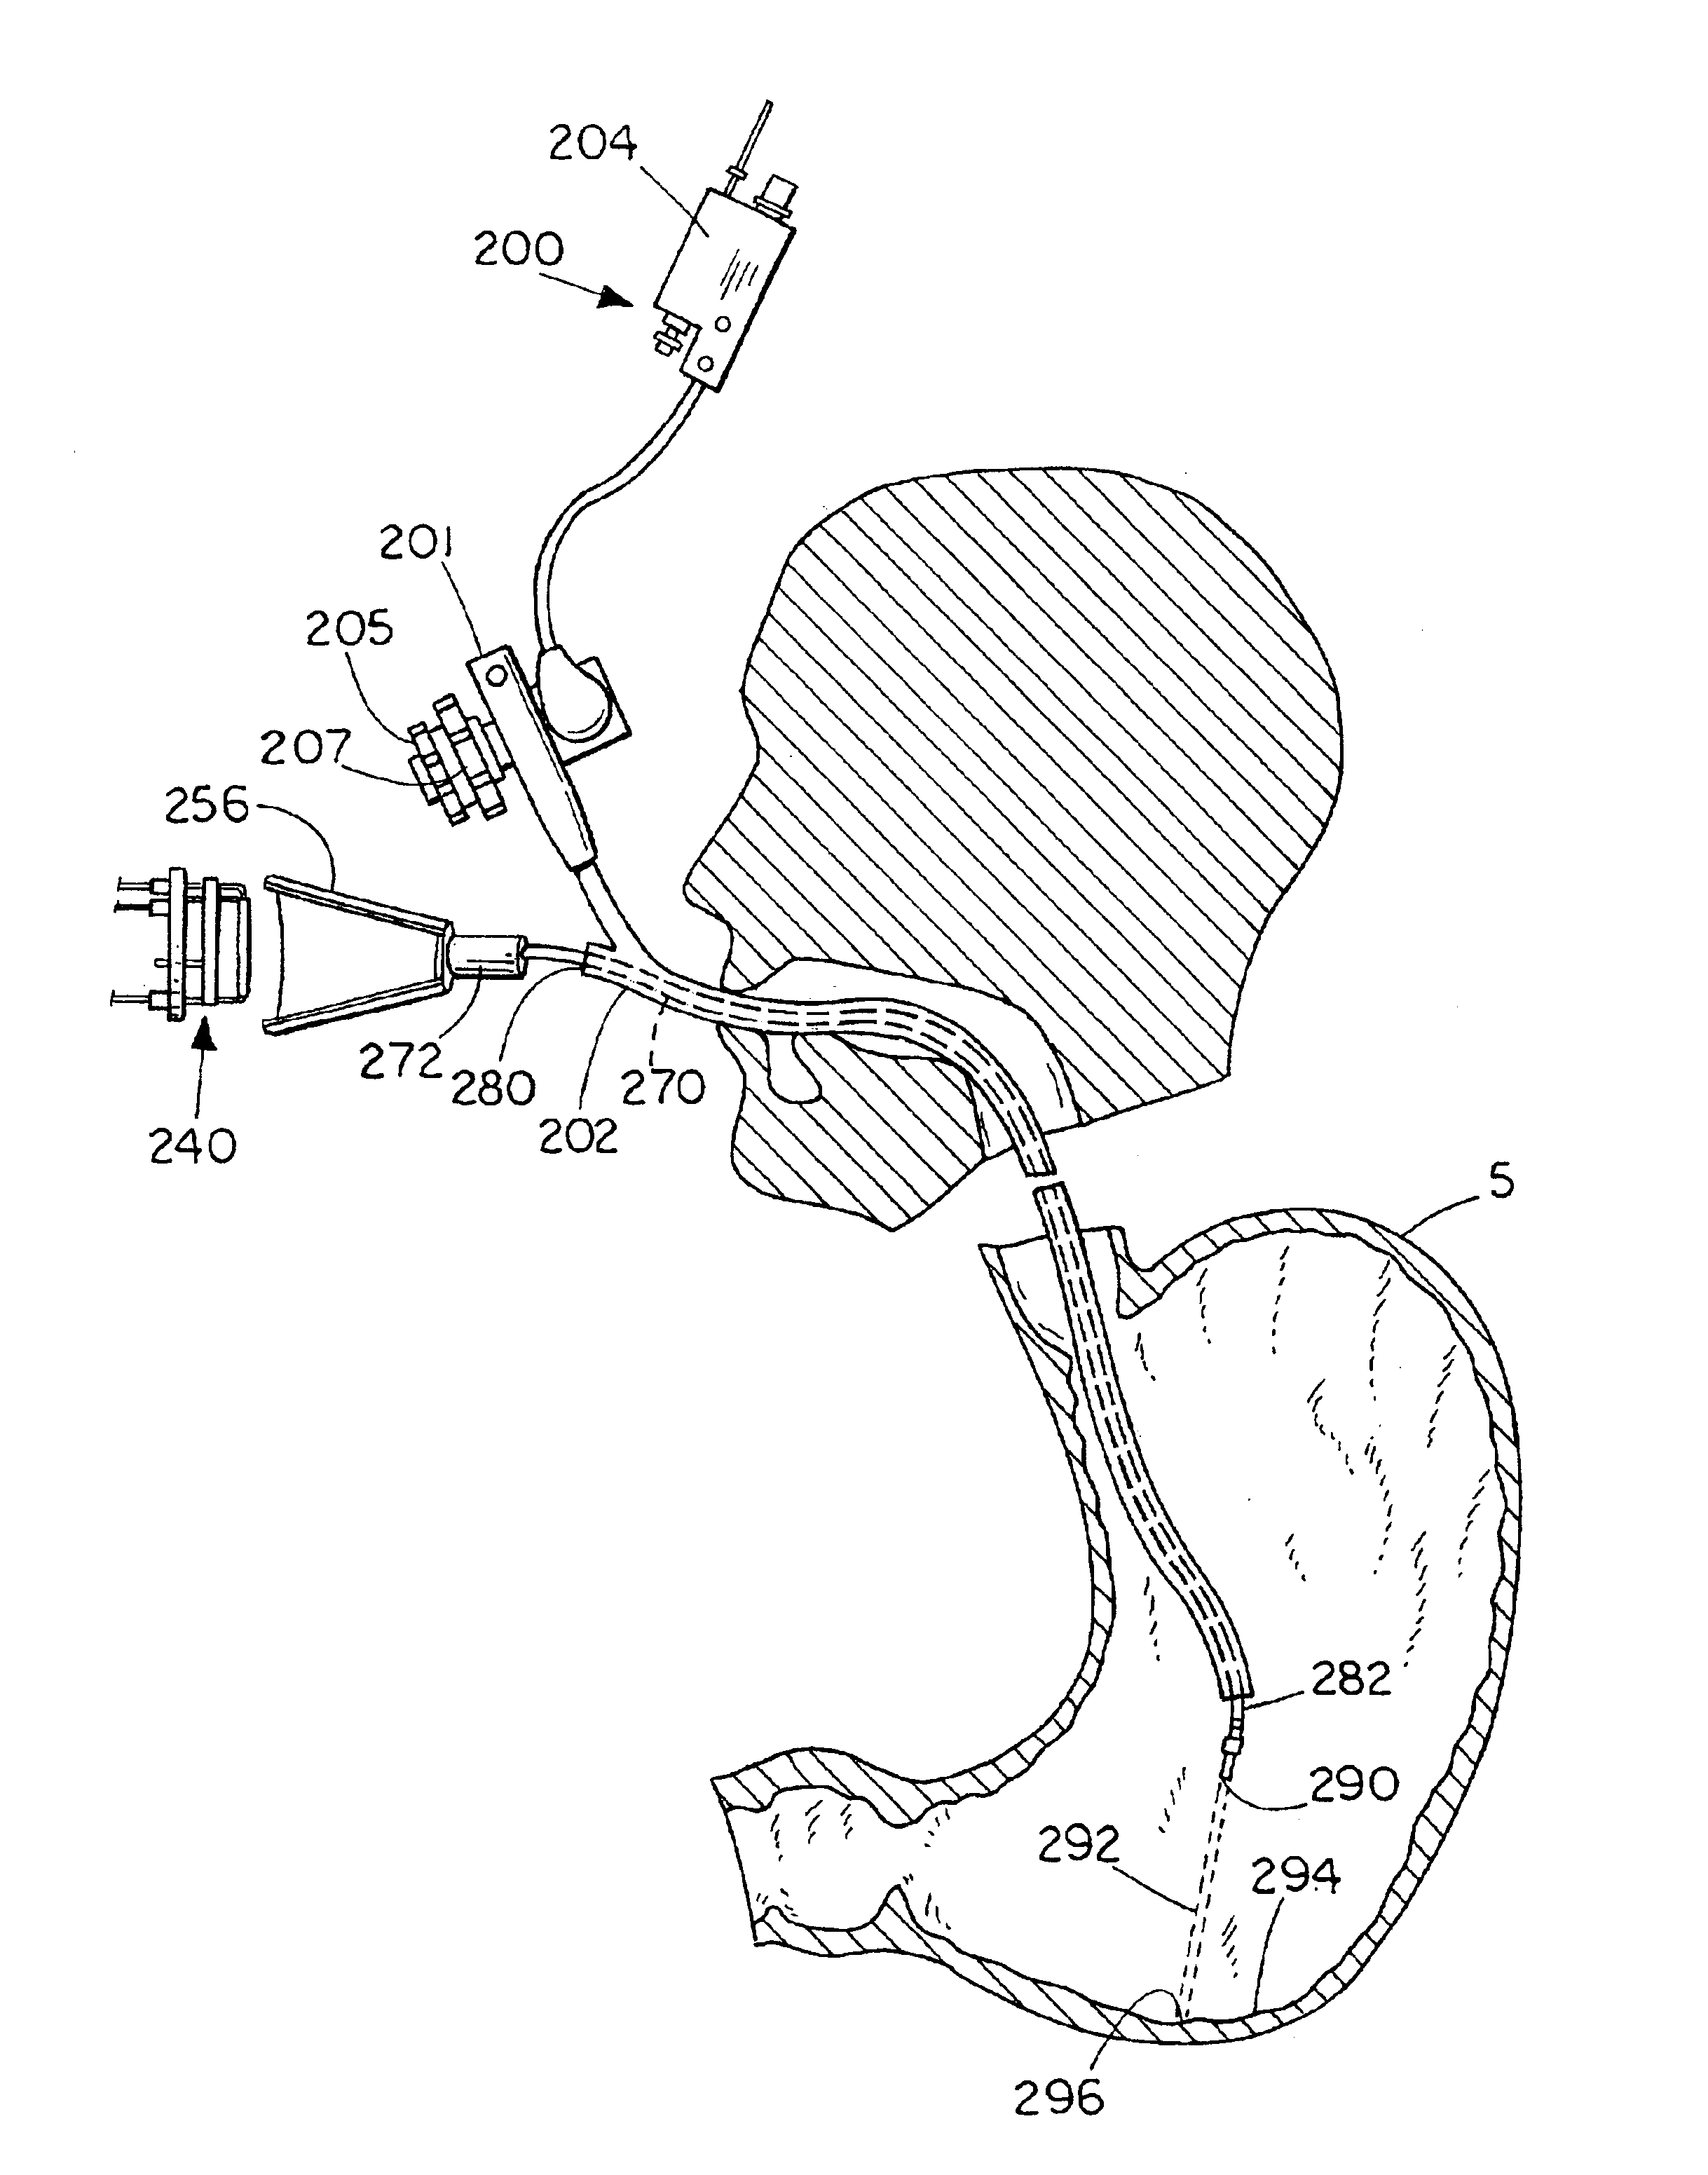 Apparatus and method for debilitating or killing microorganisms within the body